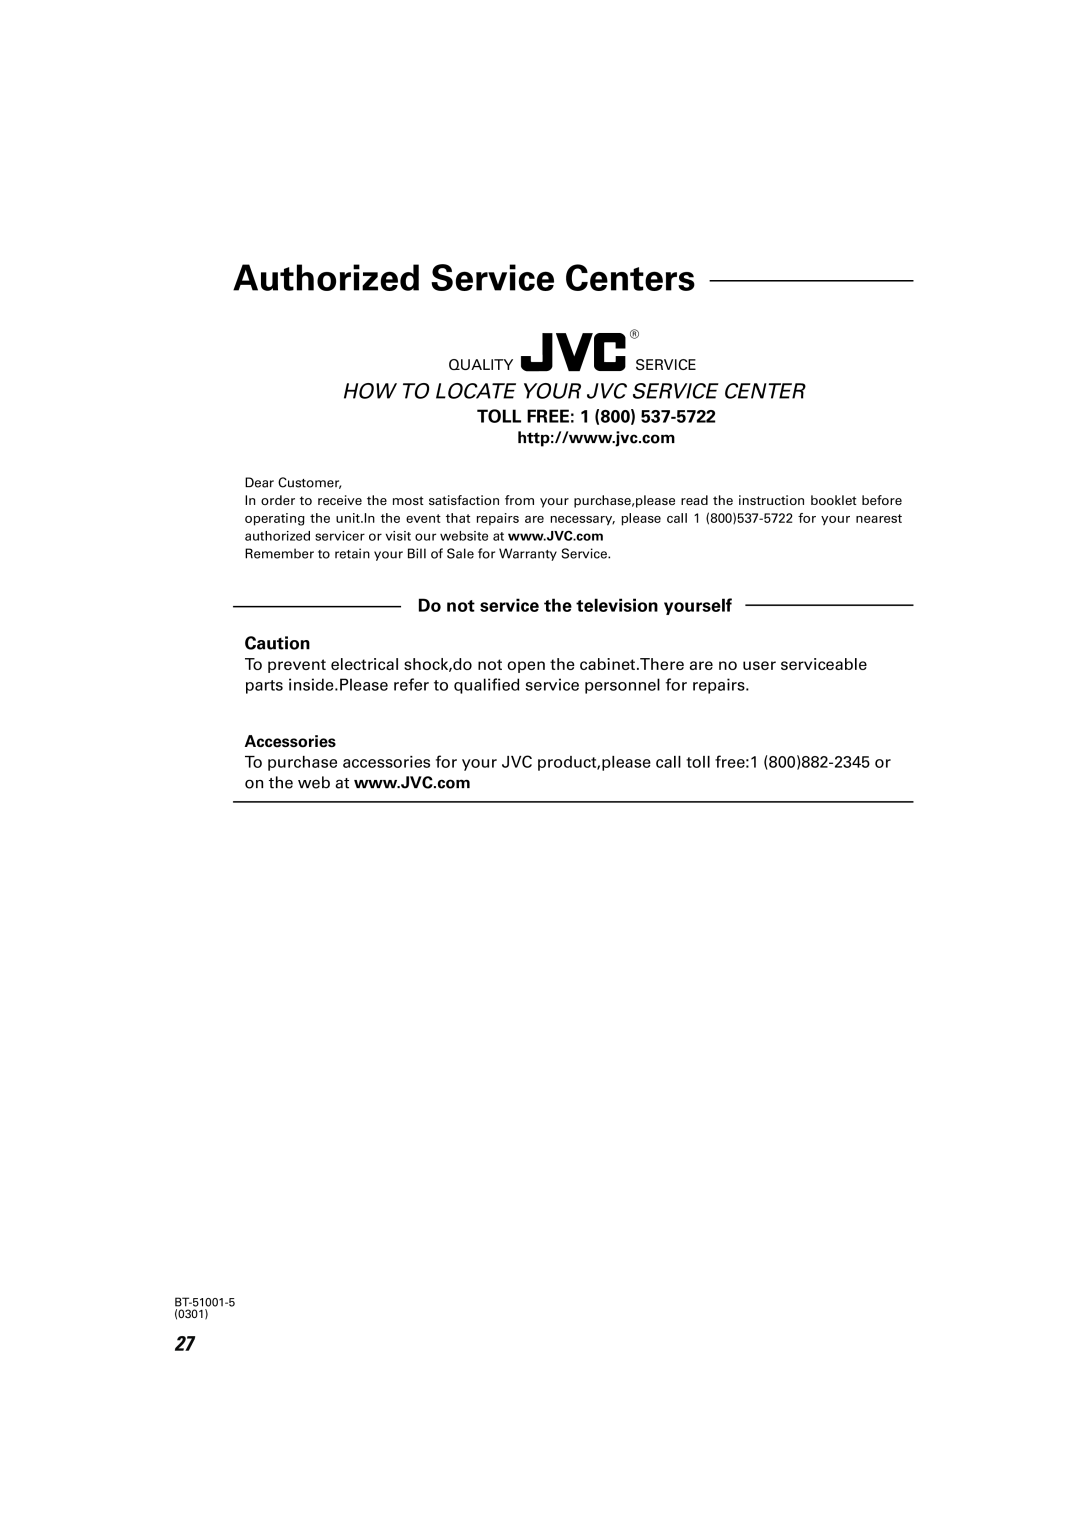 JVC MX-K30 manual How To Locate Your Jvc Service Center, Toll Free, Do not service the television yourself, Accessories 